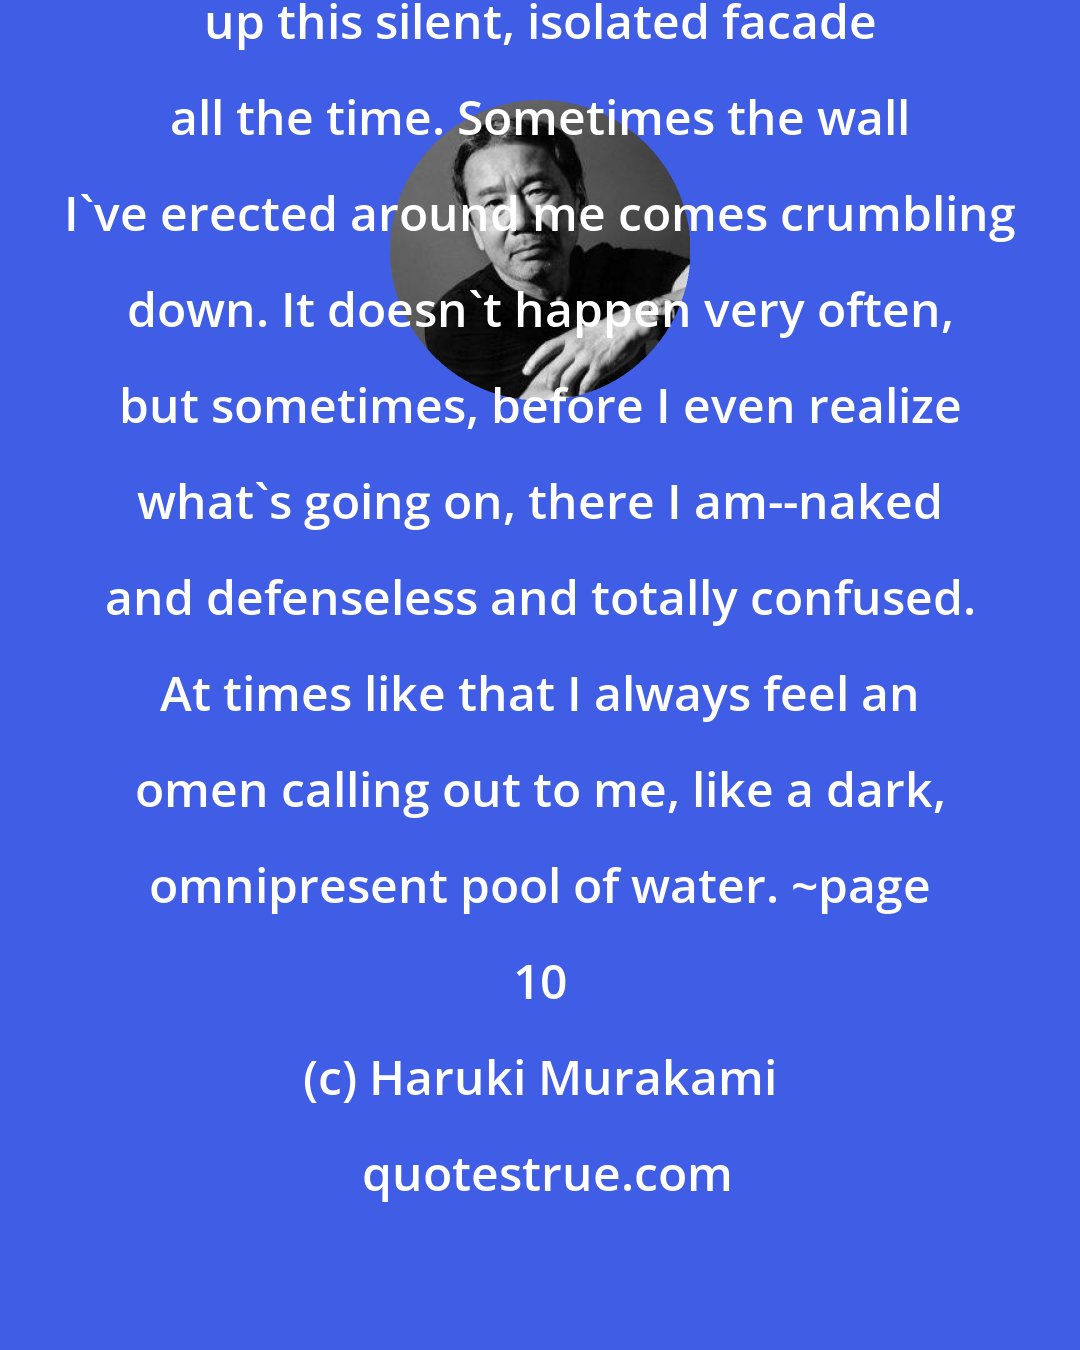 Haruki Murakami: I'm not trying to imply I can keep up this silent, isolated facade all the time. Sometimes the wall I've erected around me comes crumbling down. It doesn't happen very often, but sometimes, before I even realize what's going on, there I am--naked and defenseless and totally confused. At times like that I always feel an omen calling out to me, like a dark, omnipresent pool of water. ~page 10